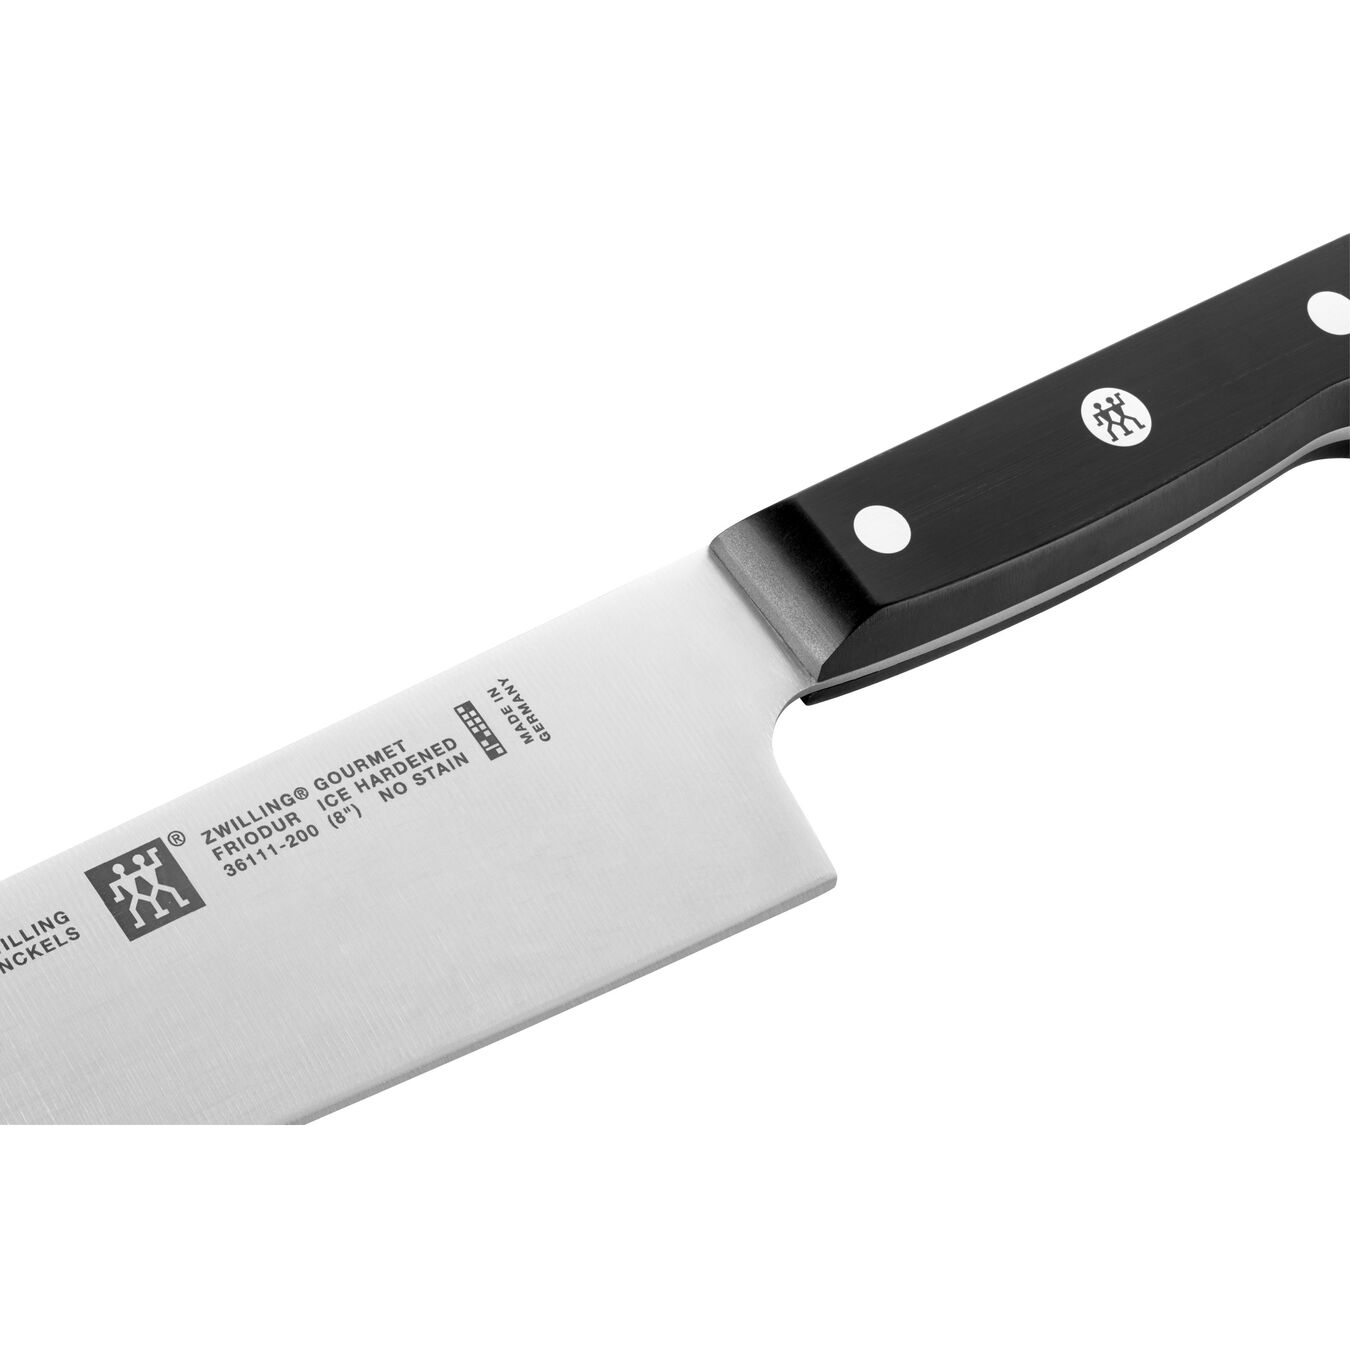 20 cm Chef's knife,,large 3